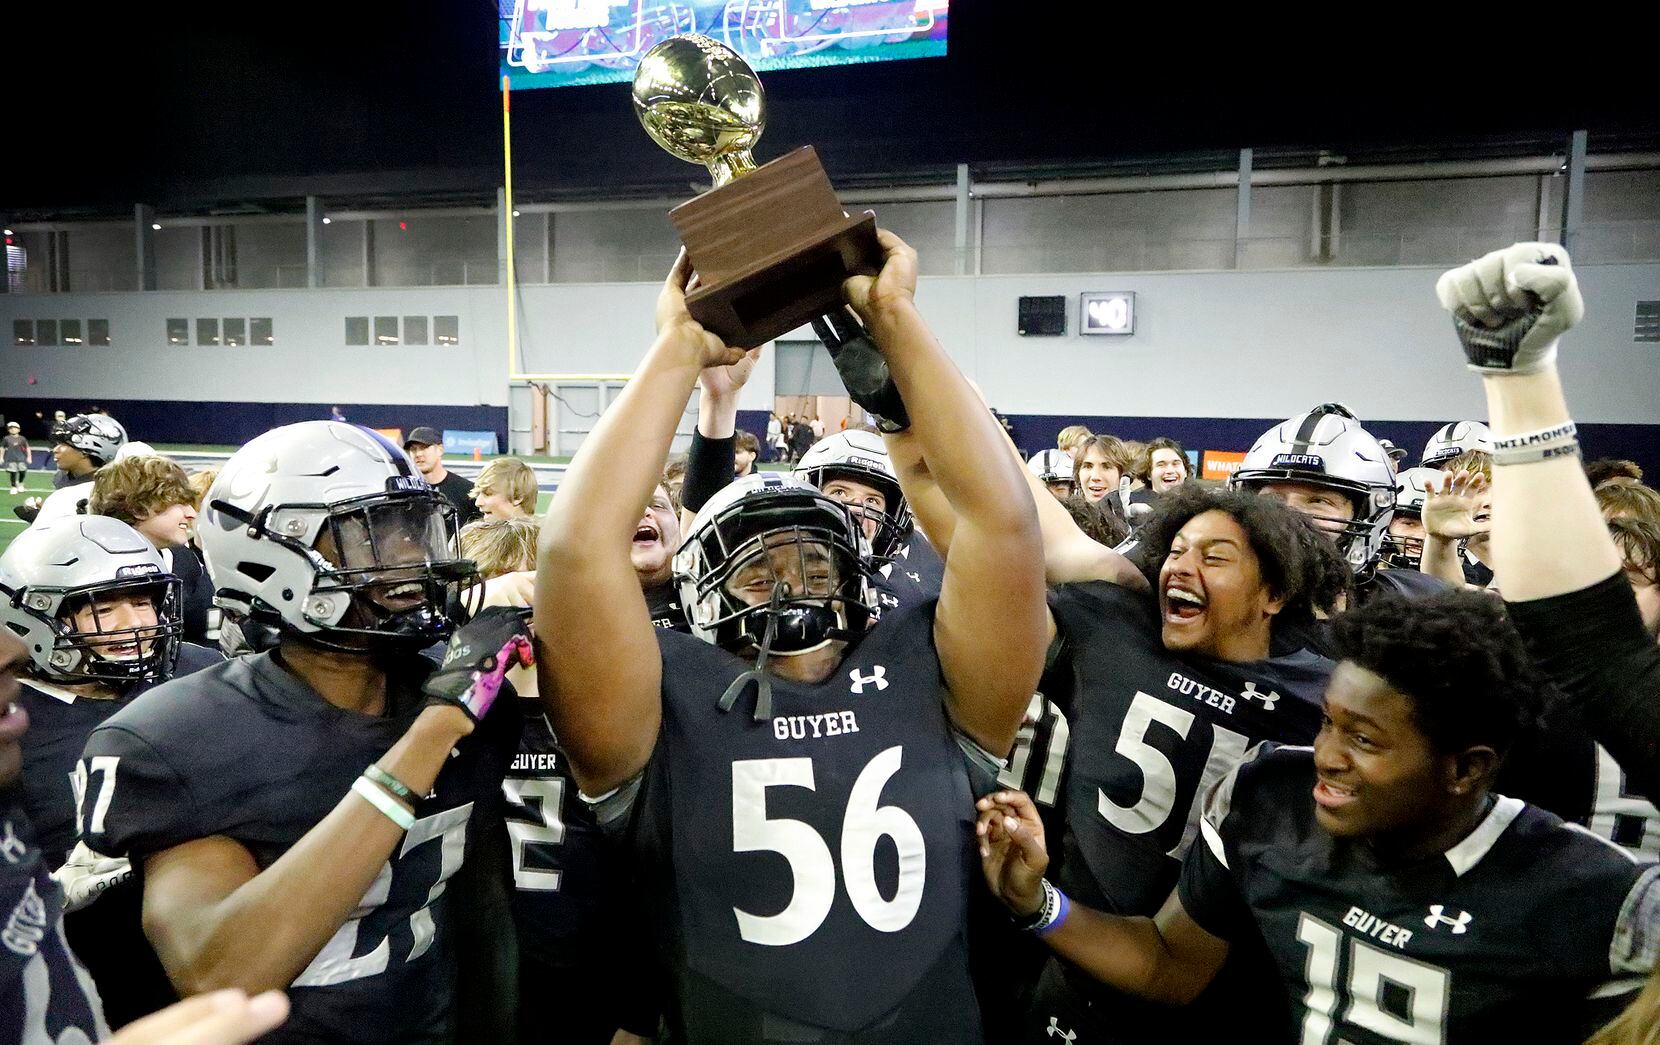 Guyer High School defensive lineman Dynell Neal (56) hoists up the trophy after the win as...